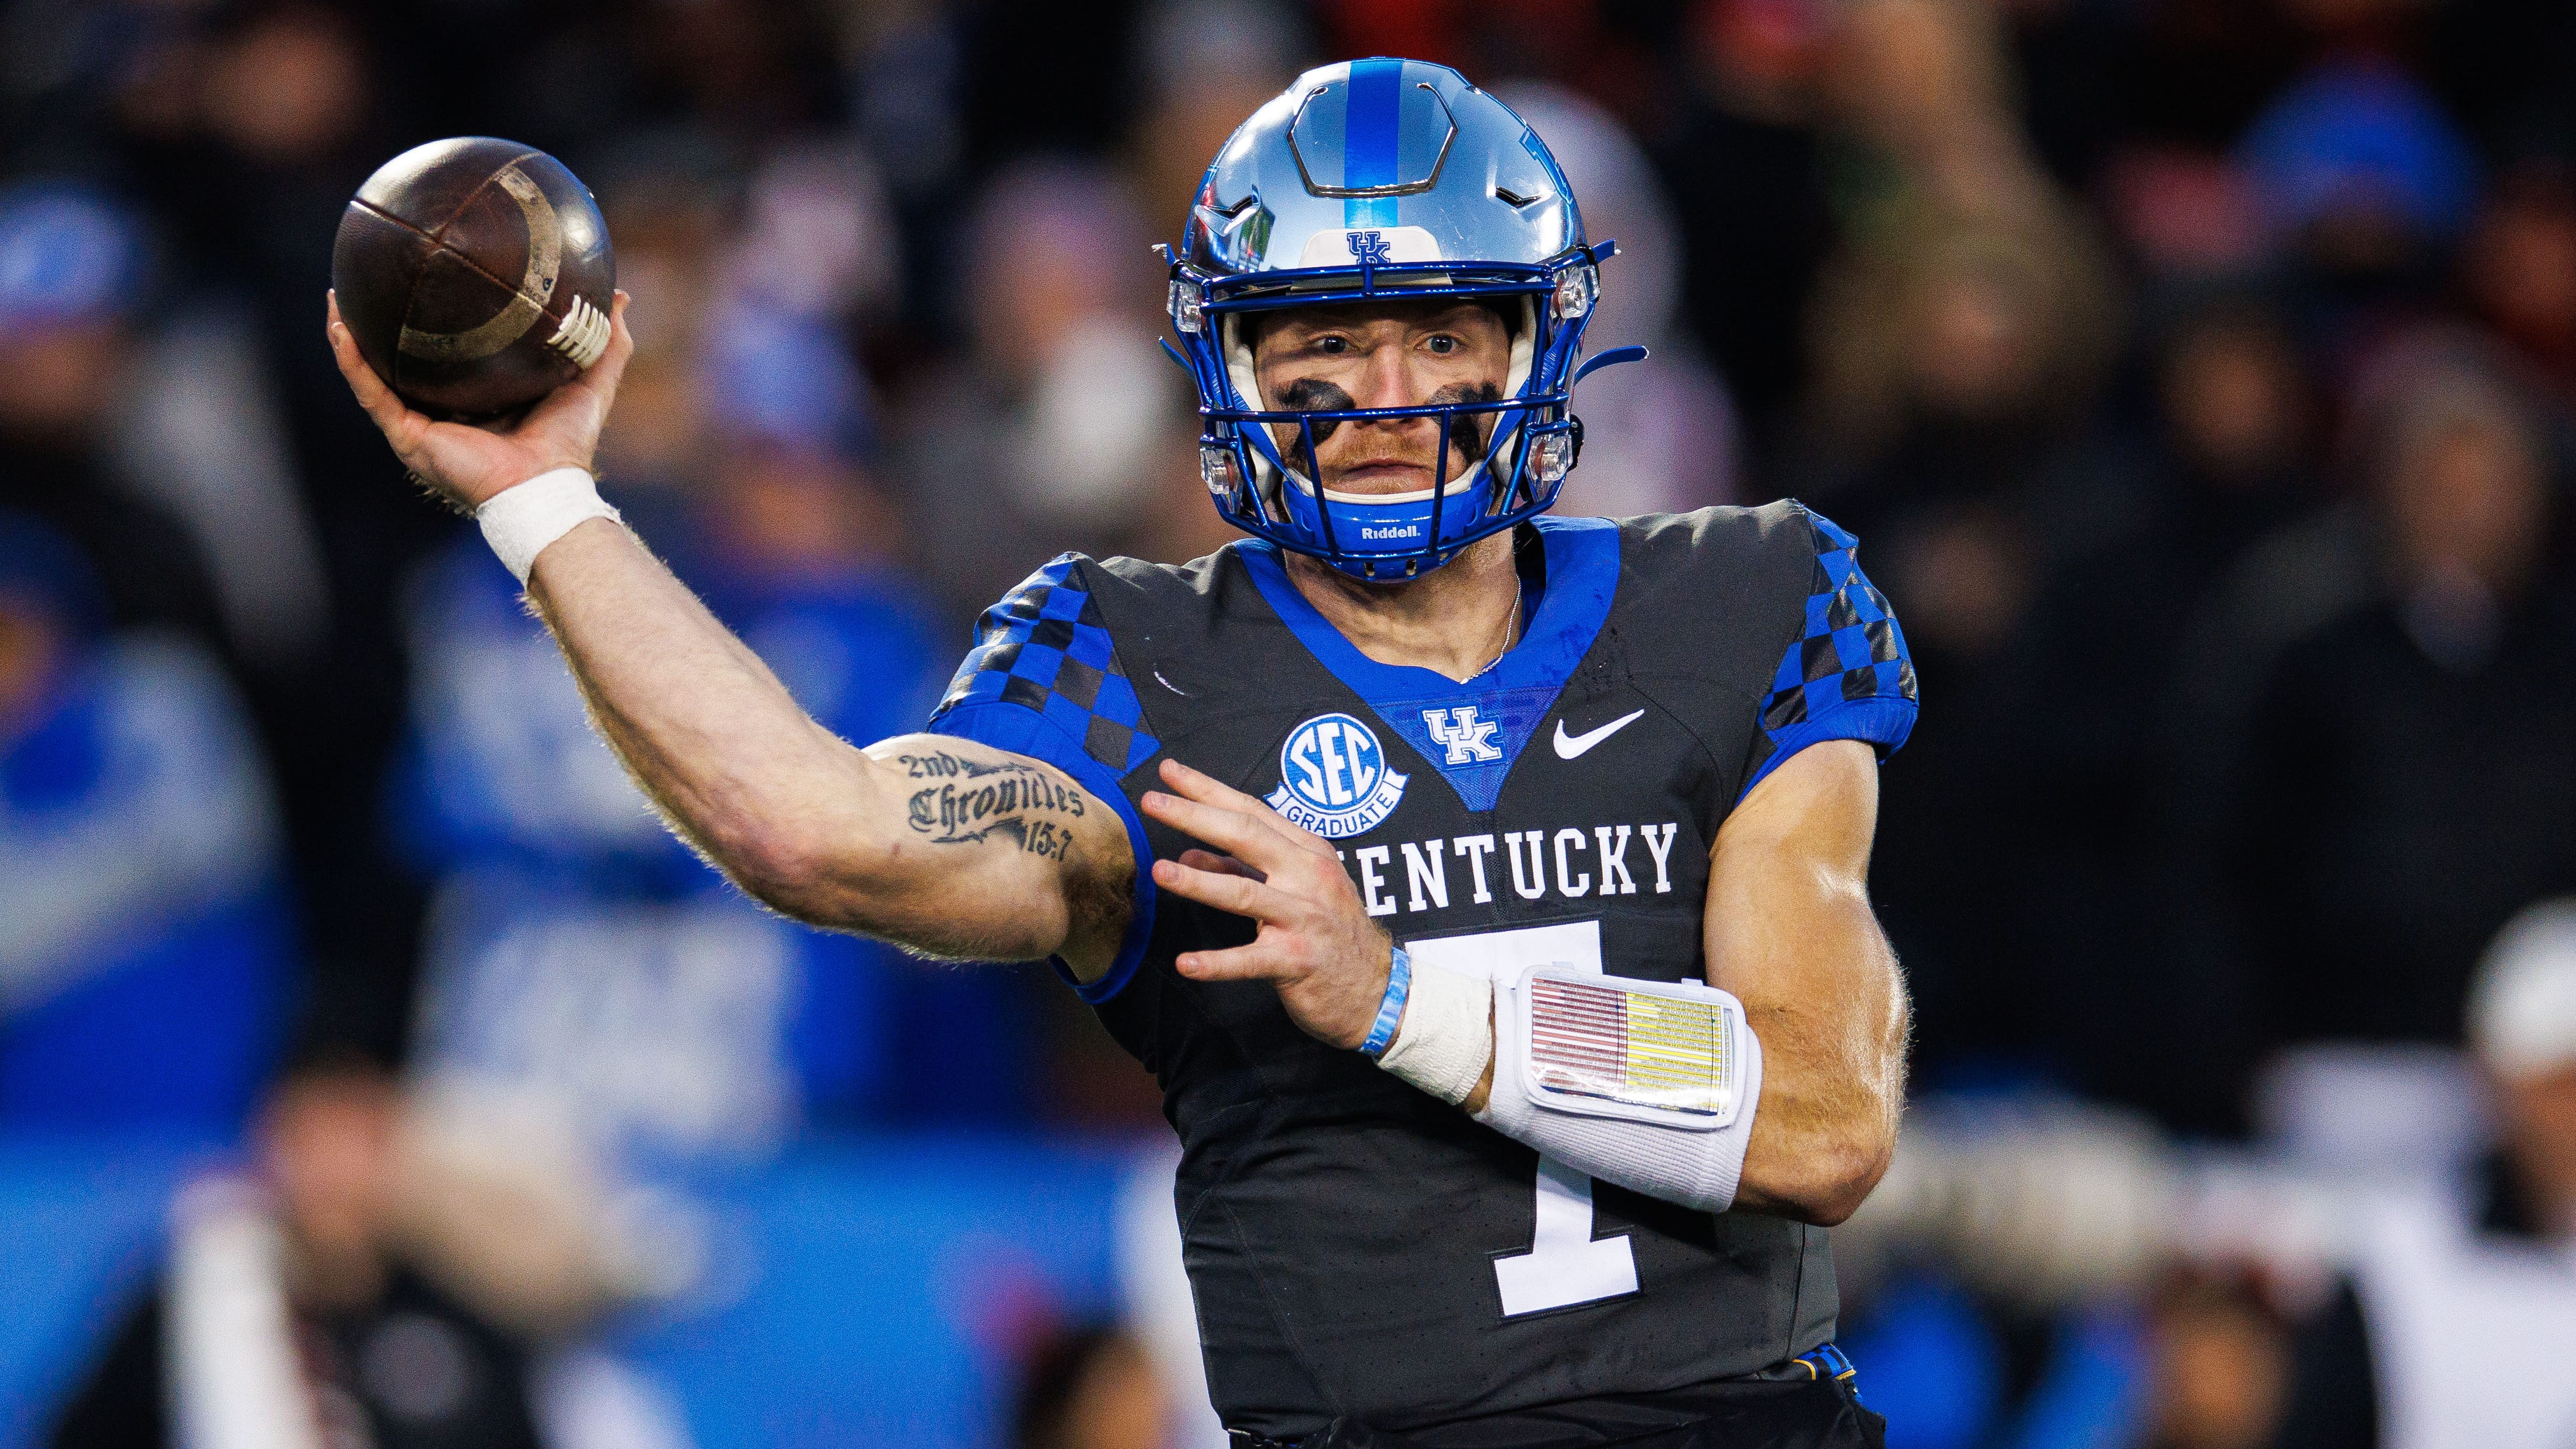 Kentucky Wildcats quarterback Will Levis (7) passes the ball during the third quarter against the Georgia Bulldogs at Kroger Field.